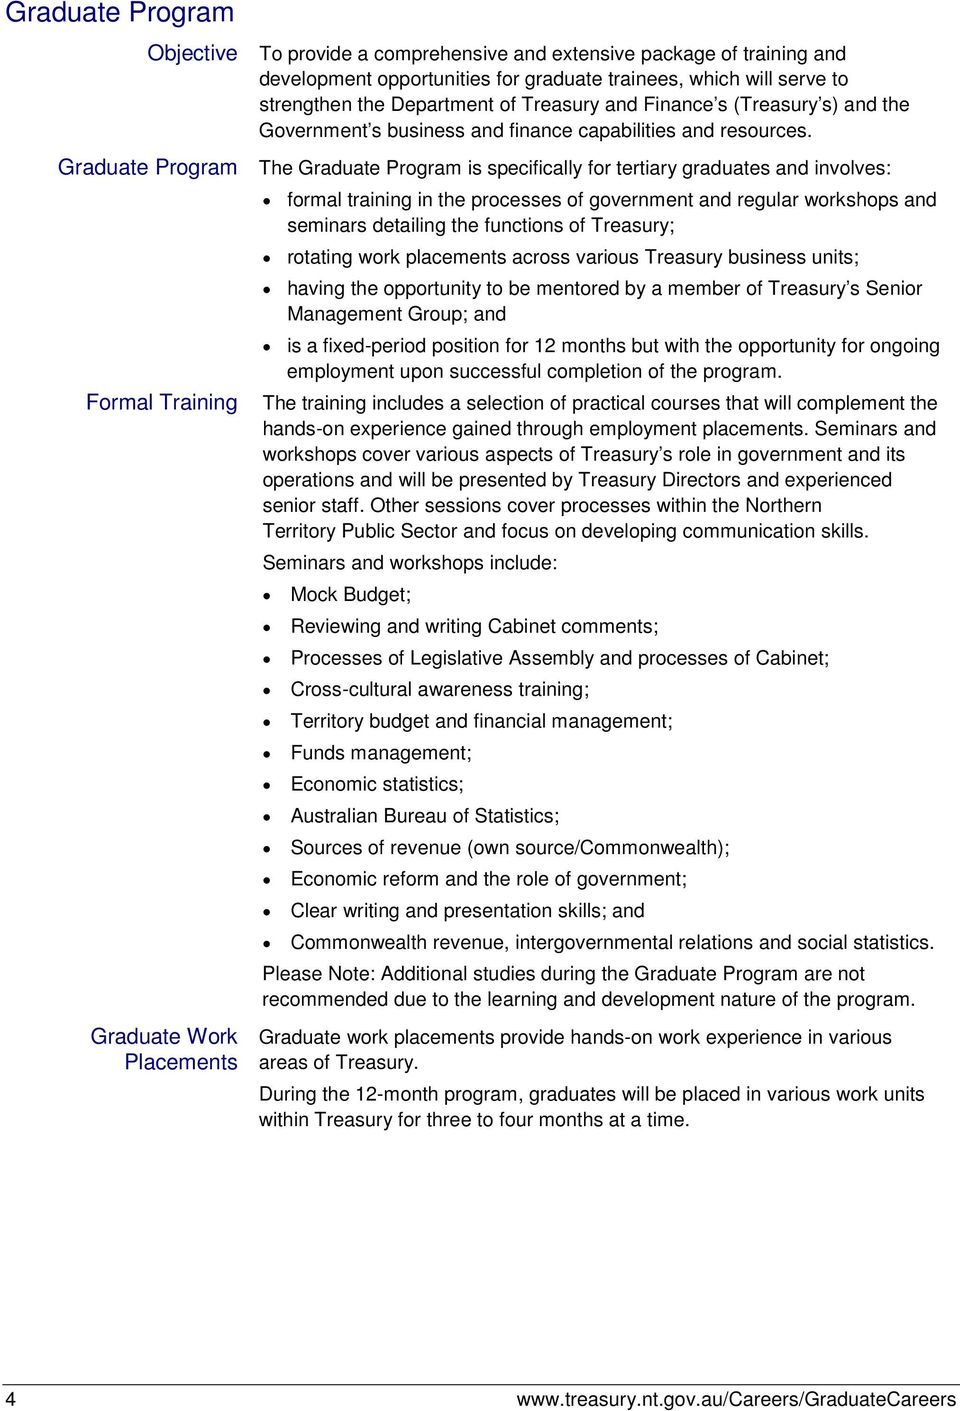 Graduate Program The Graduate Program is specifically for tertiary graduates and involves: Formal Training Graduate Work Placements formal training in the processes of government and regular